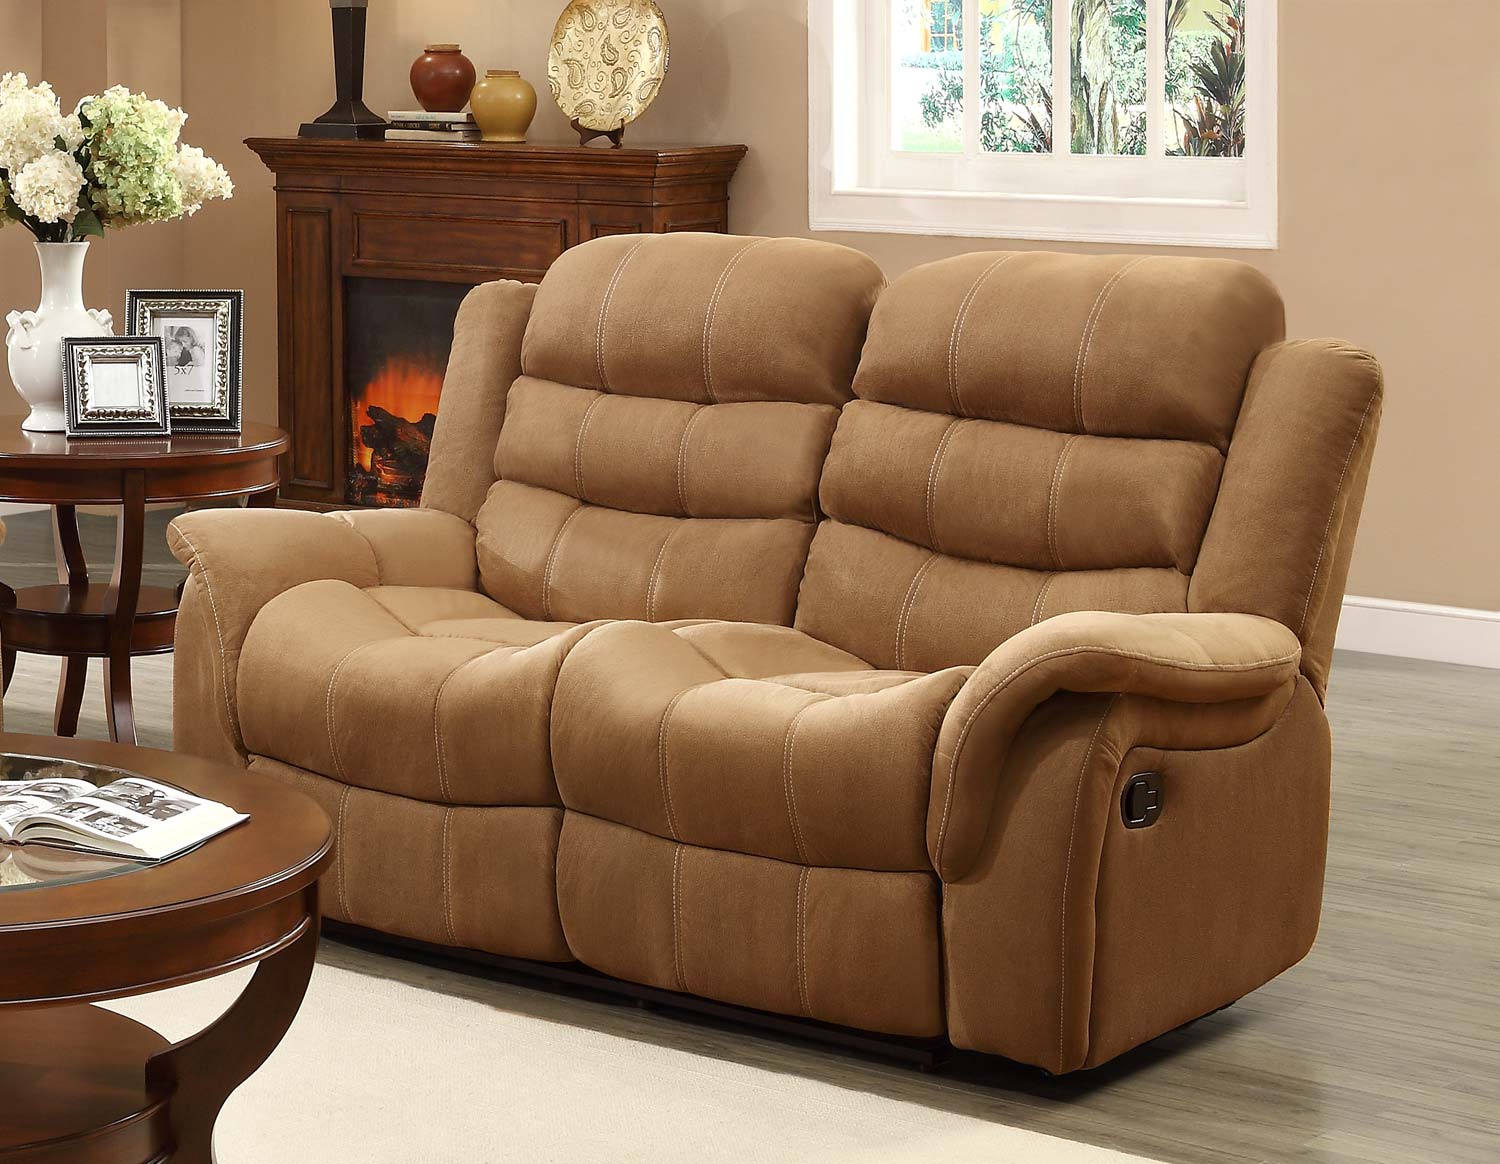 Homelegance Huxley Love Seat Double Recliner - Brown 9777BR-2 |  Traveller Location